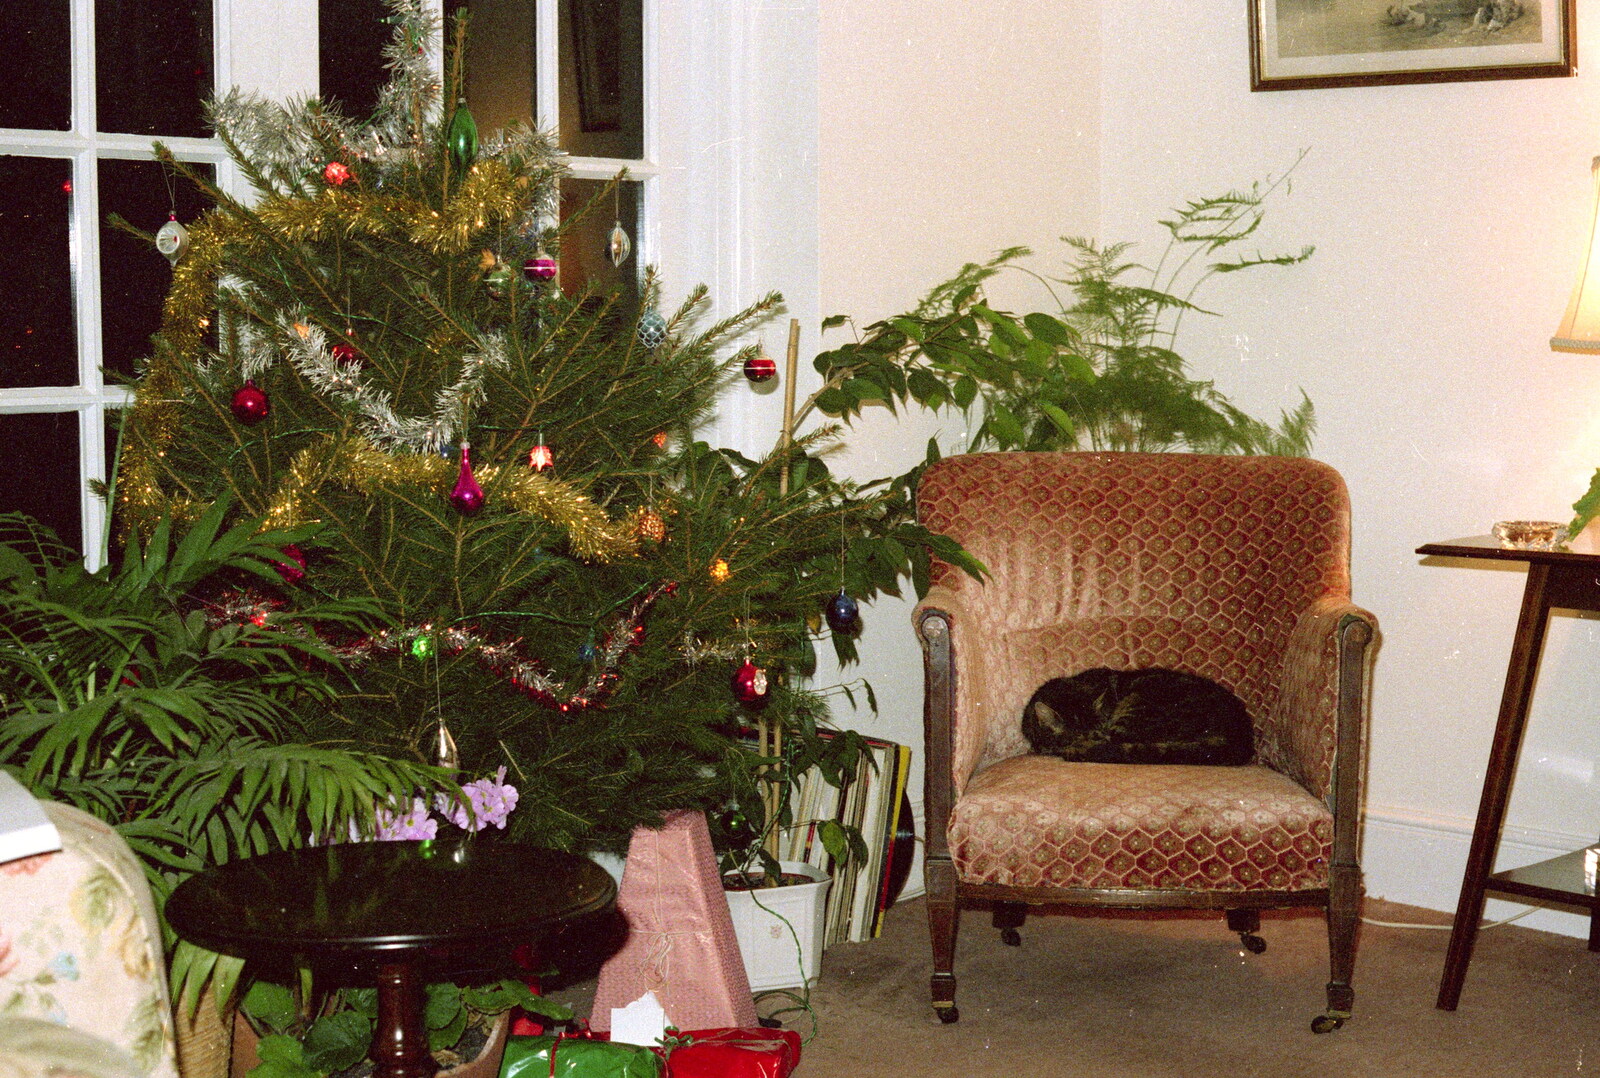 A Christmas tree and a curled-up cat from Brockenhurst College Presentation and Christmas, Hampshire - 19th December 1985